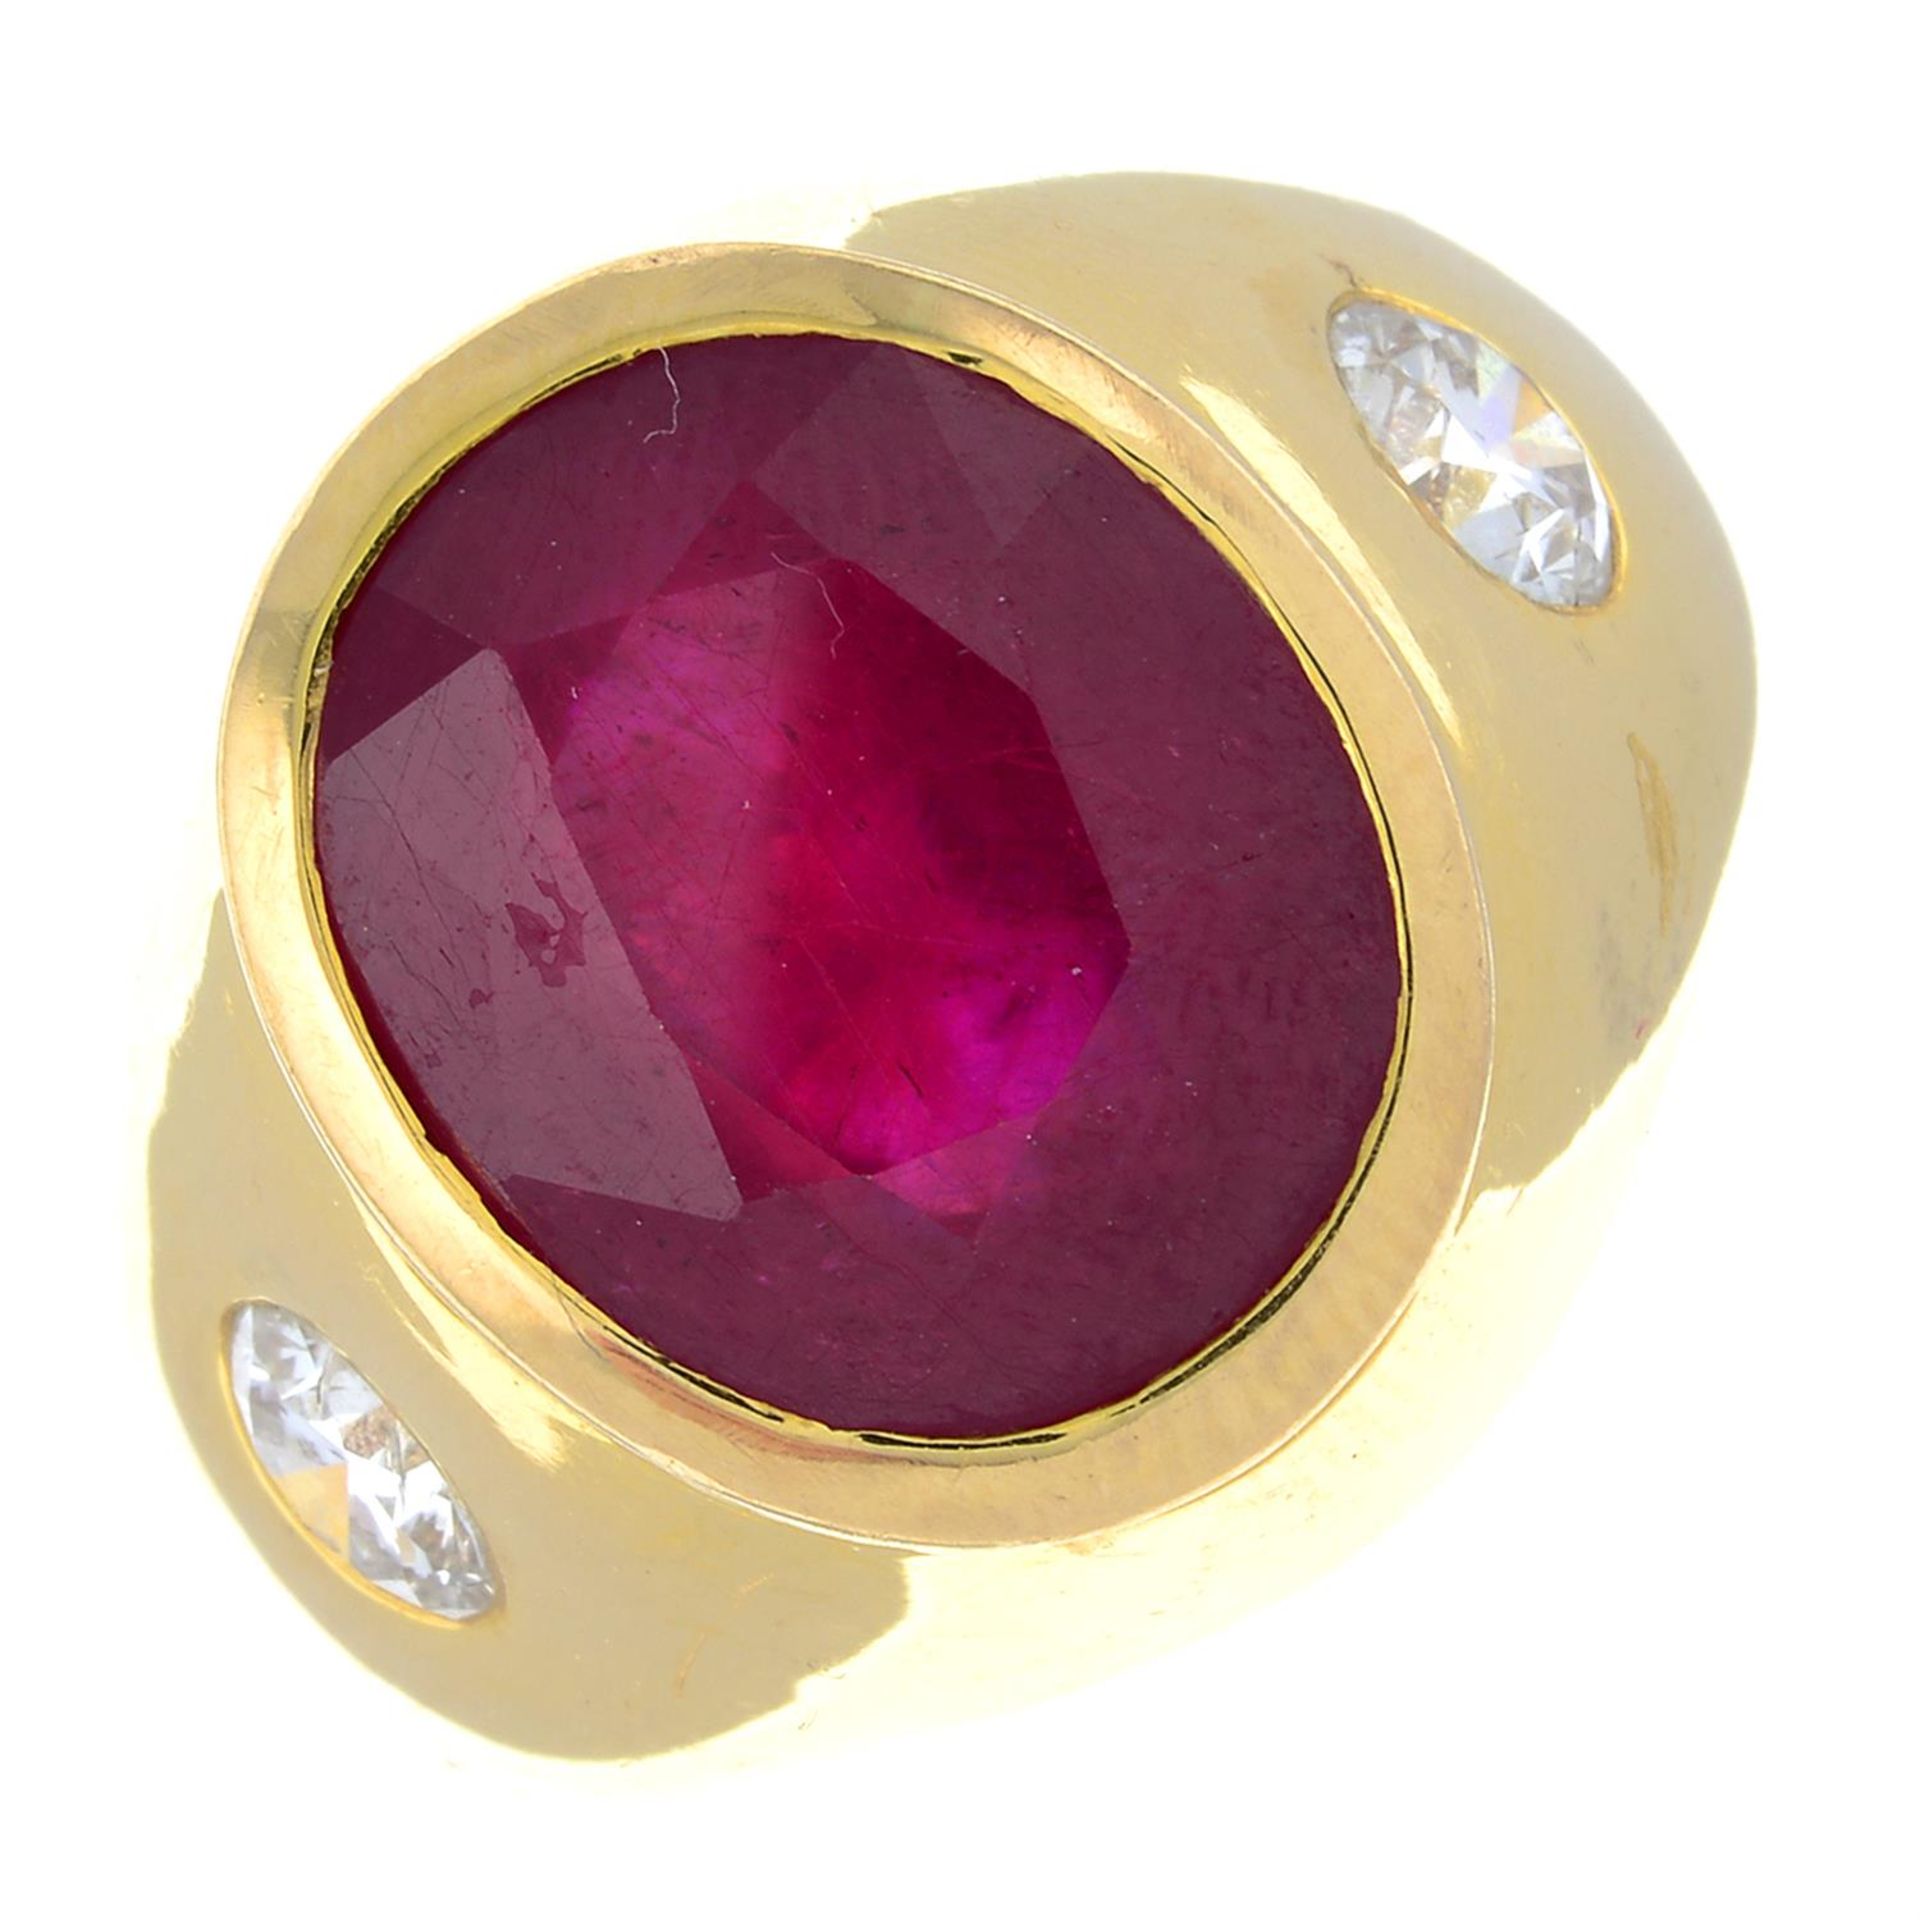 A glass-filled ruby and diamond three-stone ring.